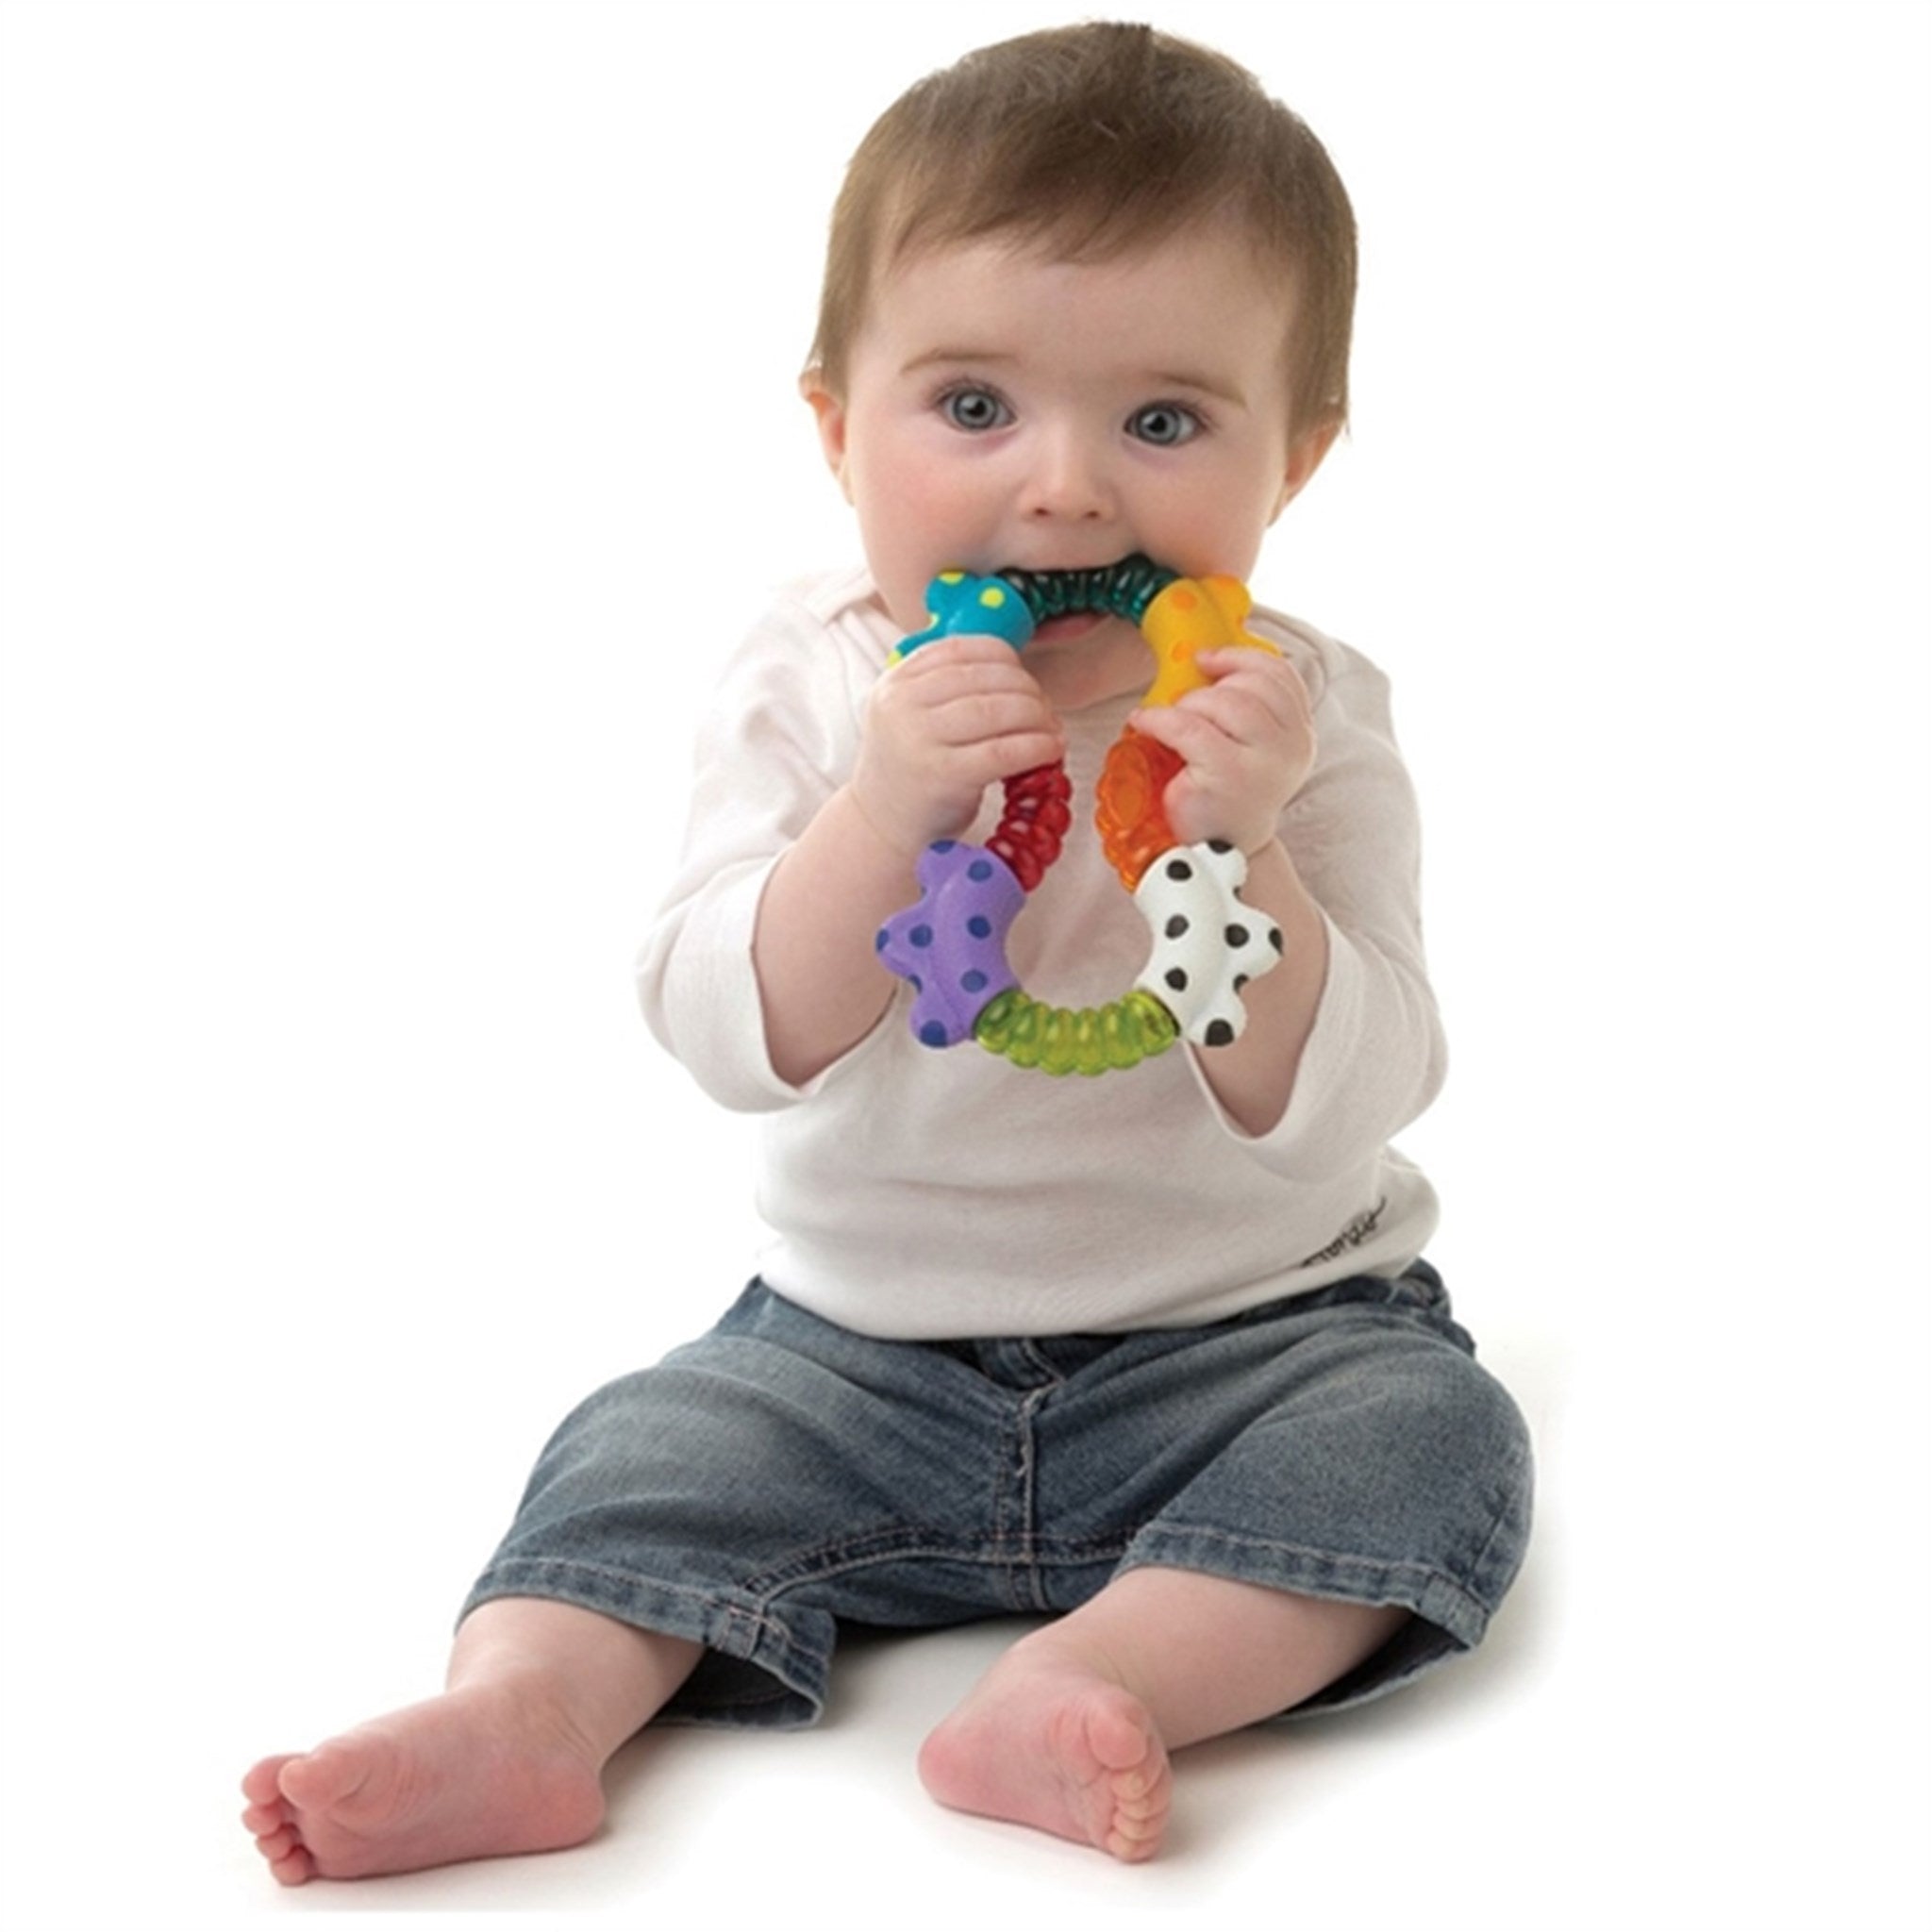 Playgro Click And Twist Rattle 2